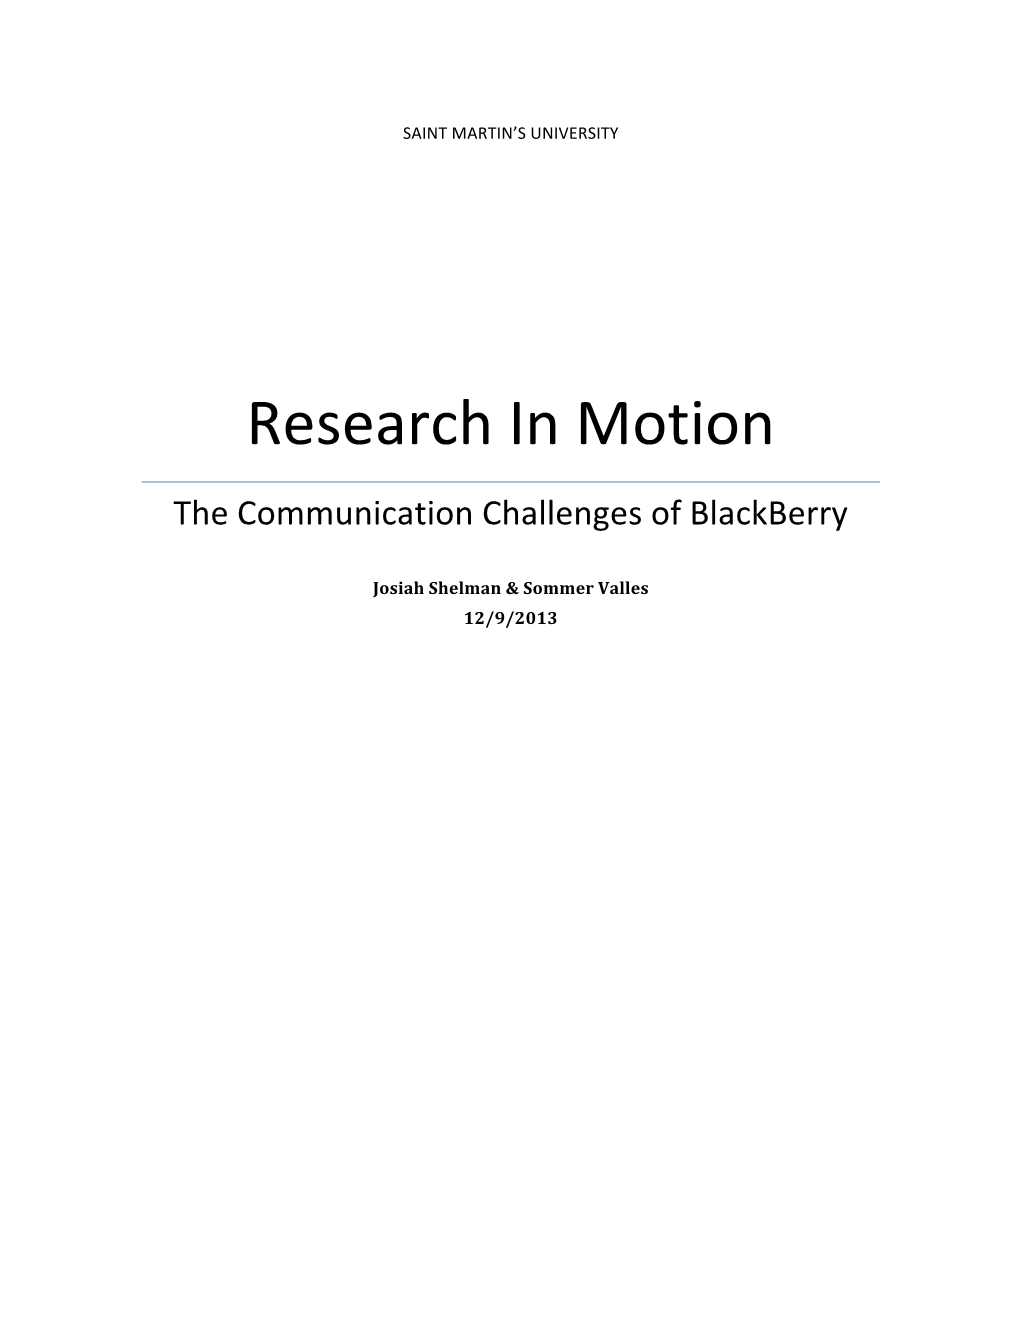 Research in Motion the Communication Challenges of Blackberry